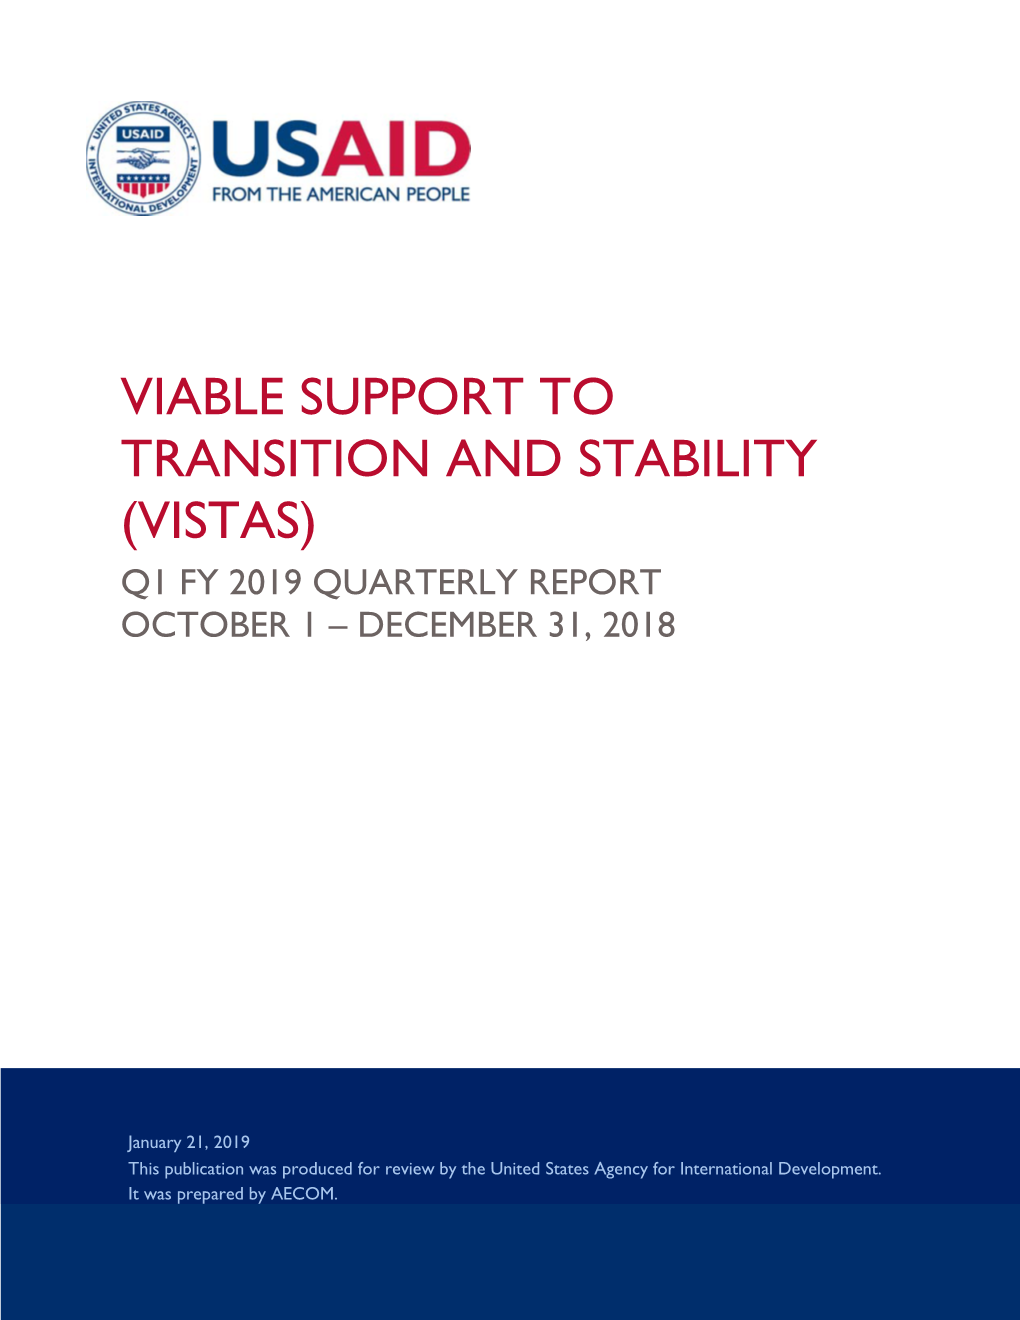 Viable Support to Transition and Stability (Vistas) Q1 Fy 2019 Quarterly Report October 1 – December 31, 2018